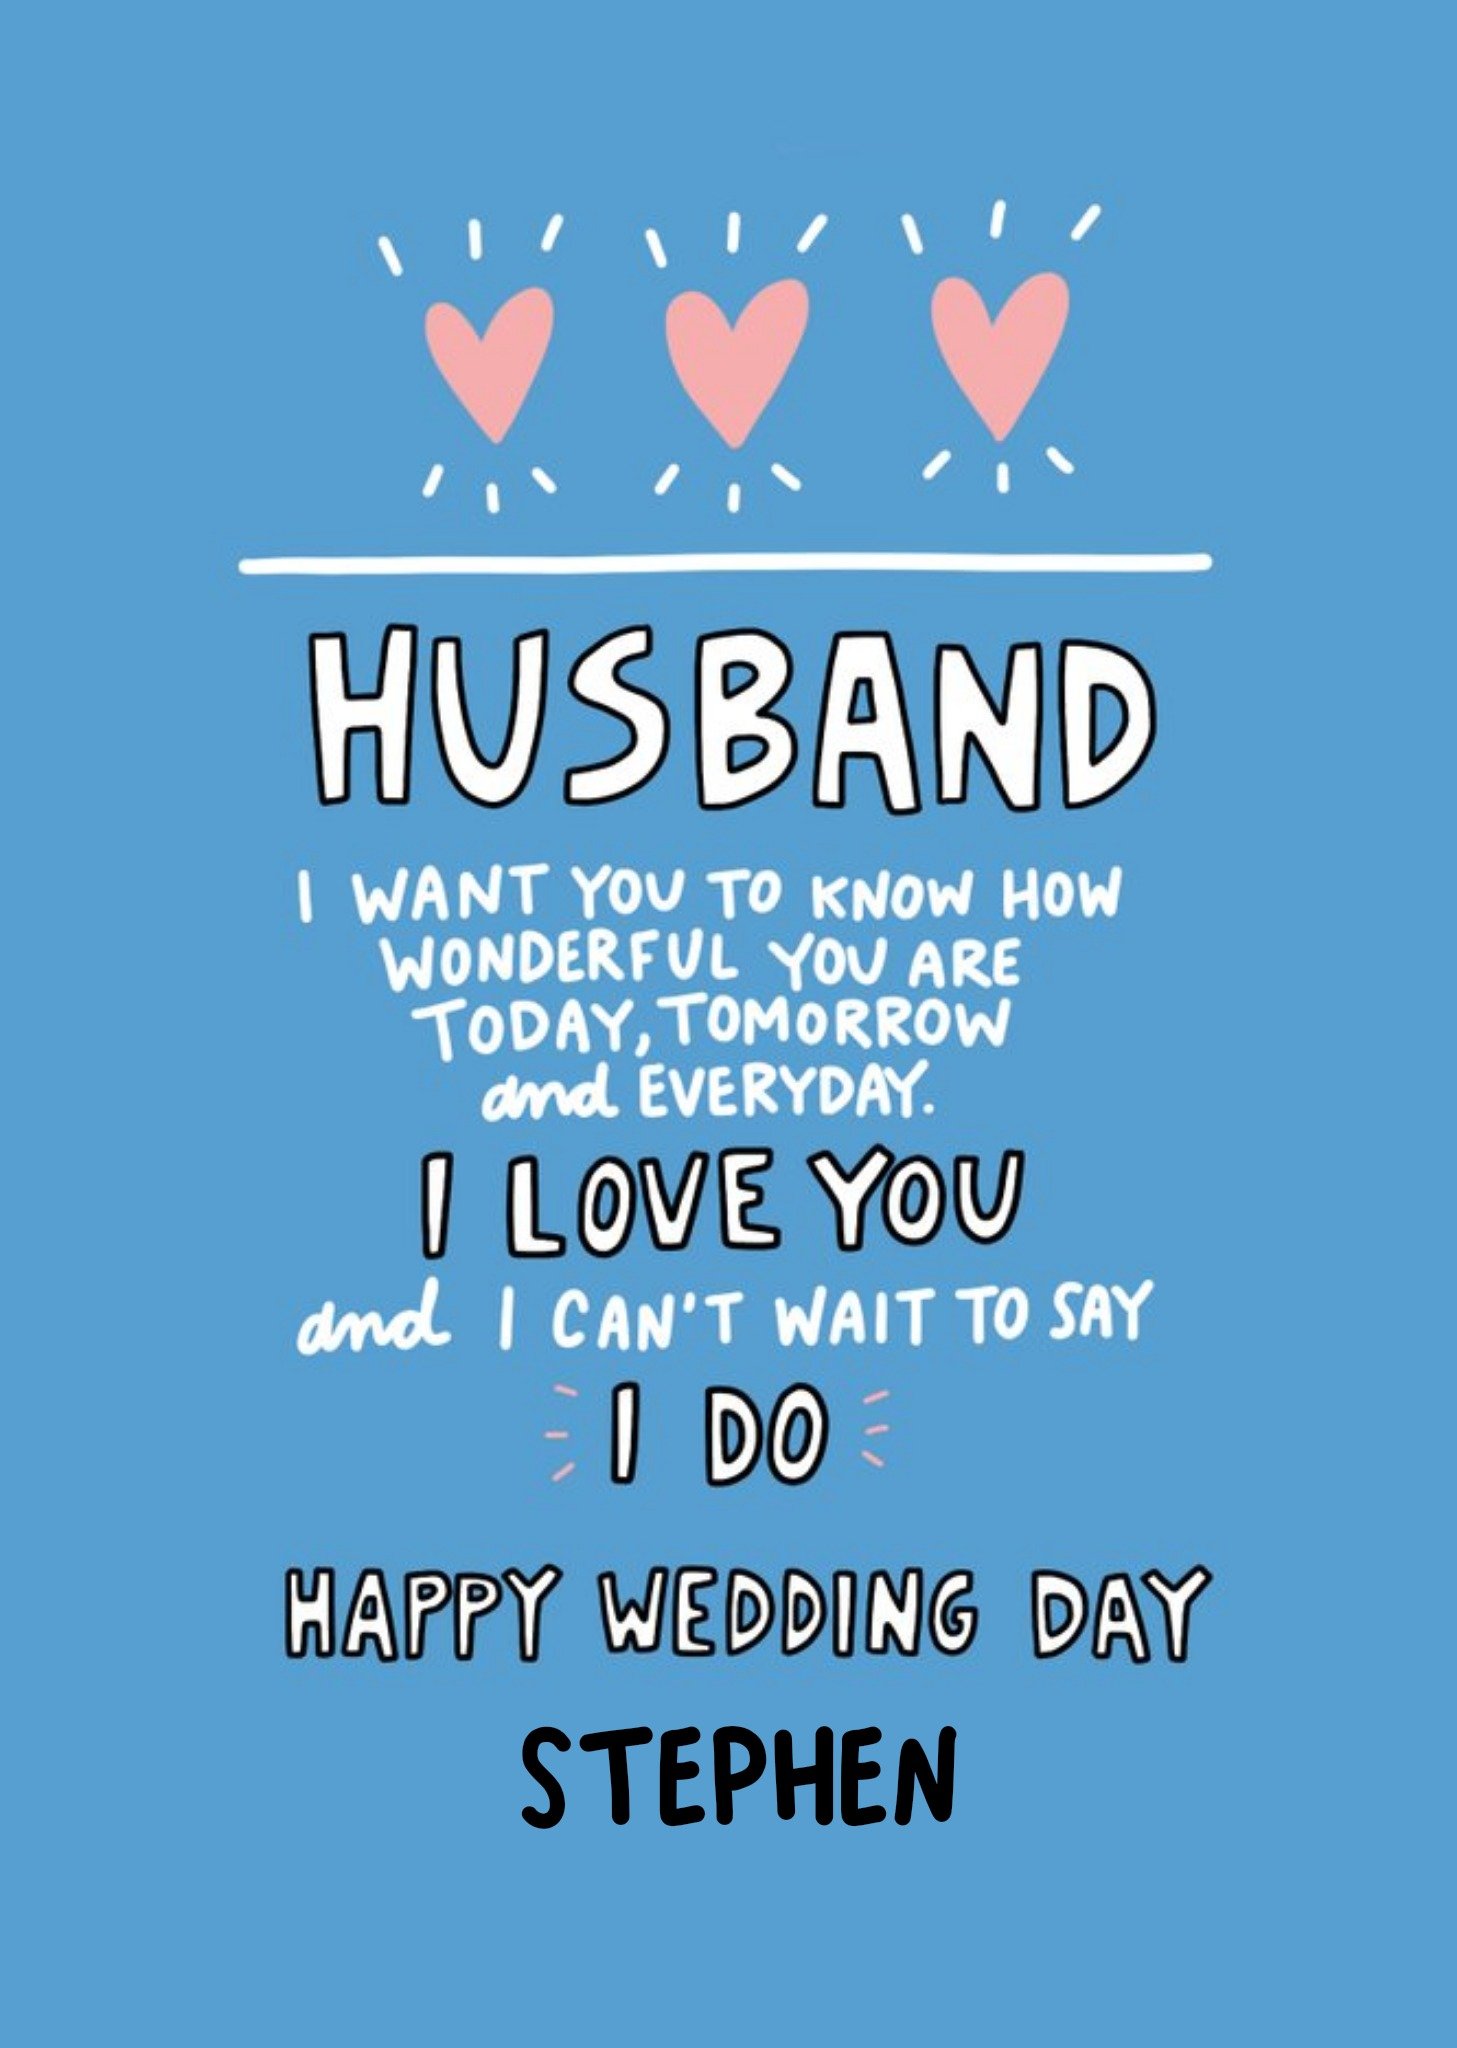 Moonpig Husband Wedding Card Sentimental Verse Can't Wait To Say I Do., Large